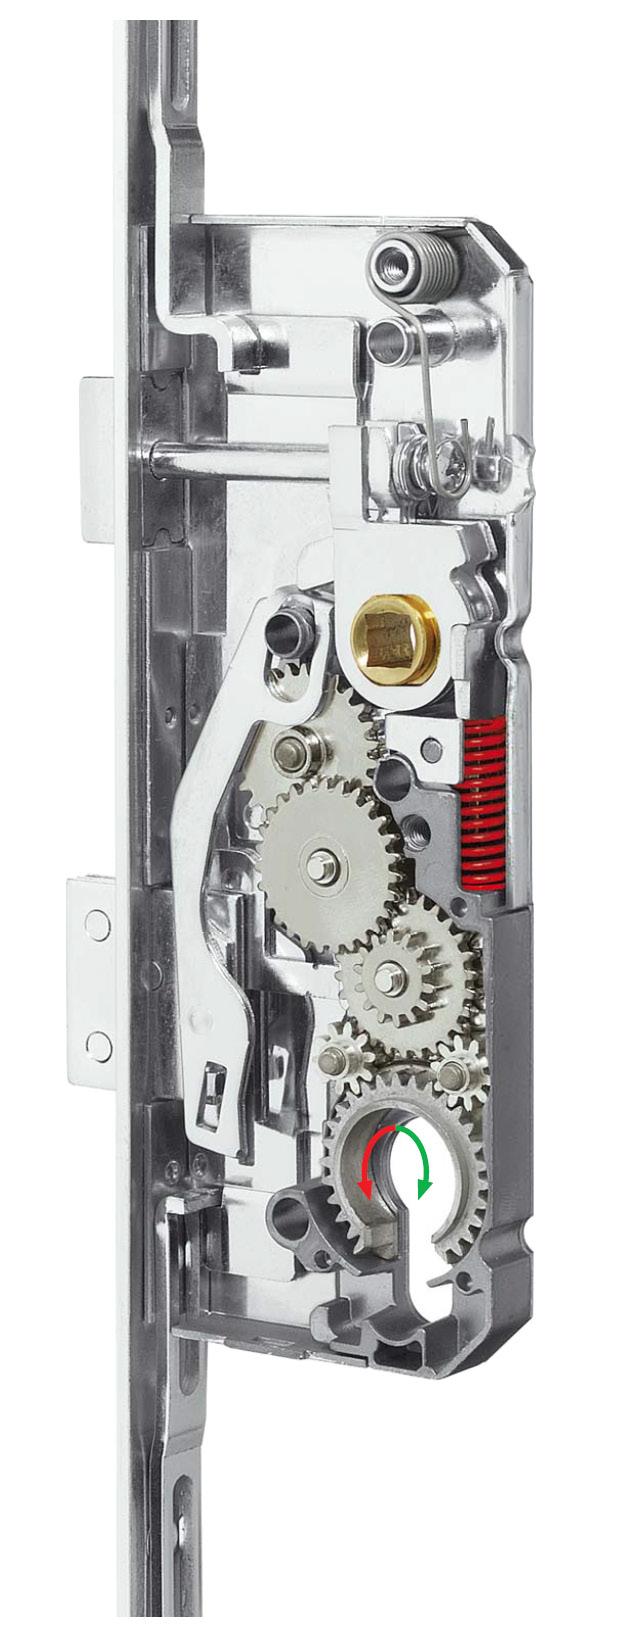 SICURTOP MULTIPOINT DOOR SYSTEMS Cylinder-driven gear lock Locks securely with two turns of the cylinder. Cold-pressed steel and sturdy gear teeth ensure precision and durability.